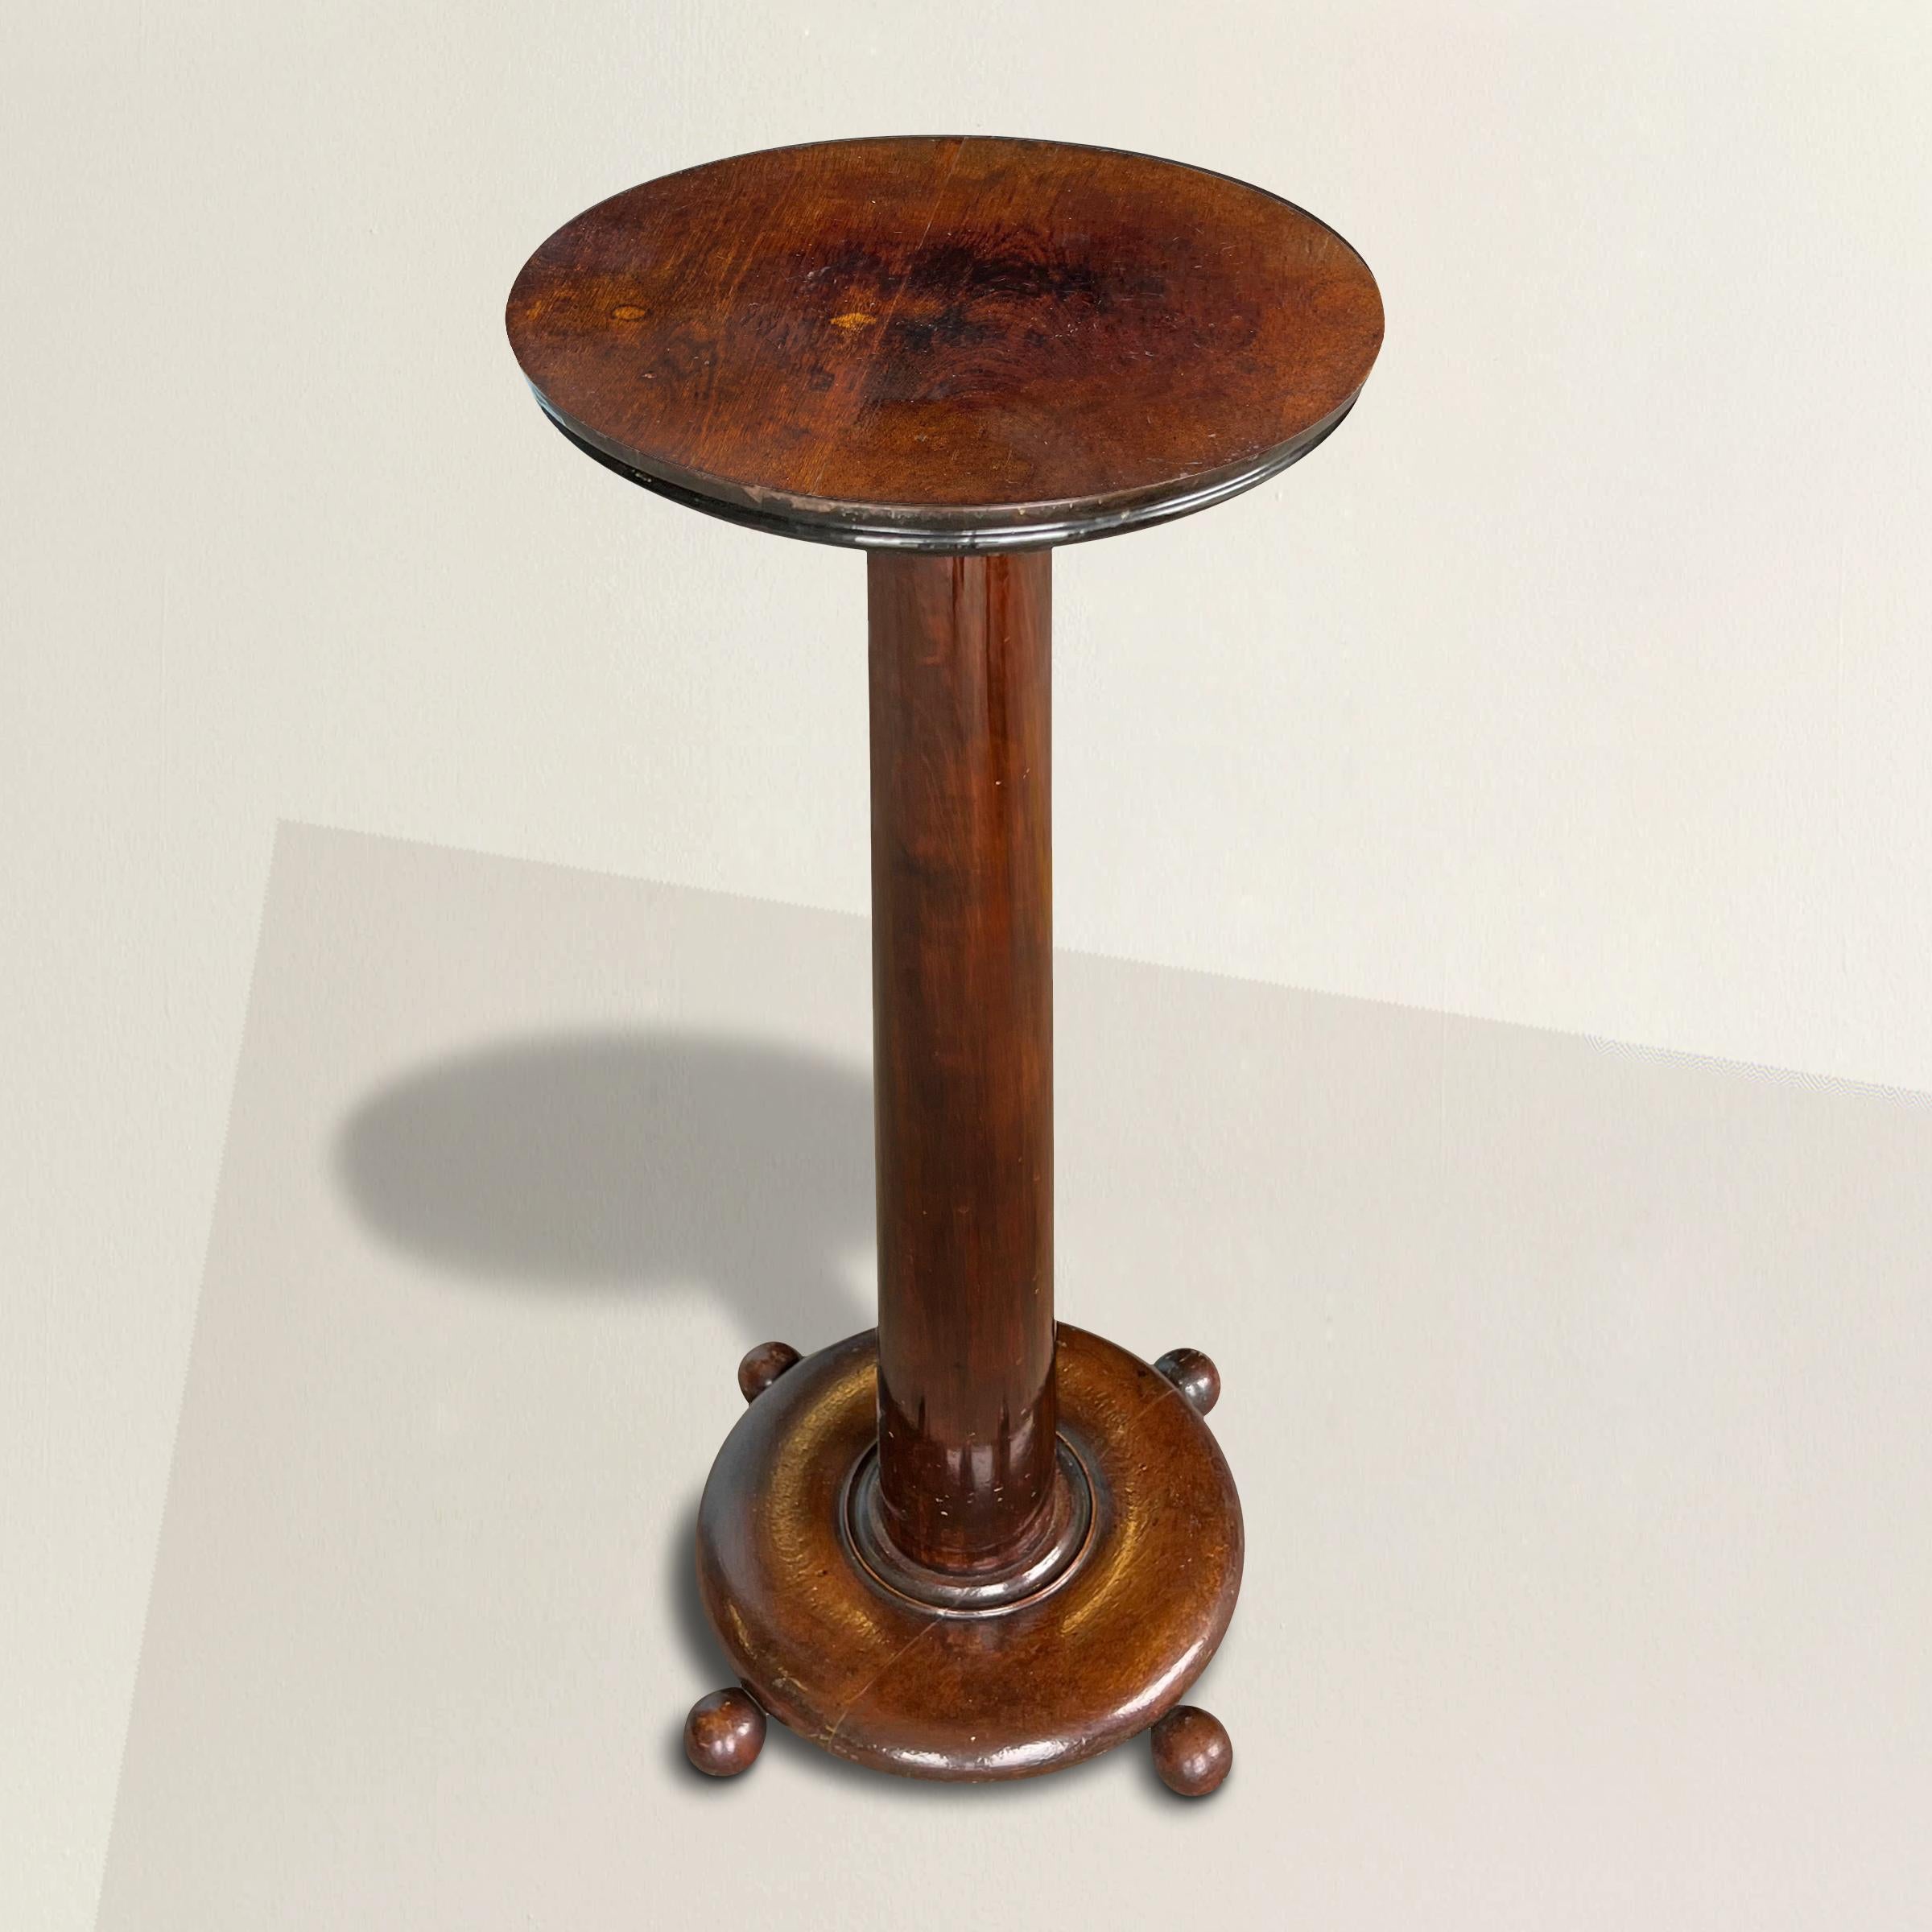 A lovable and modern-in-spirit 19th century American plant stand with a simple design with a round top supported by a tapered column on a base raised on four ball feet. Also makes a wonderful pedestal to display your favorite sculpture or objet